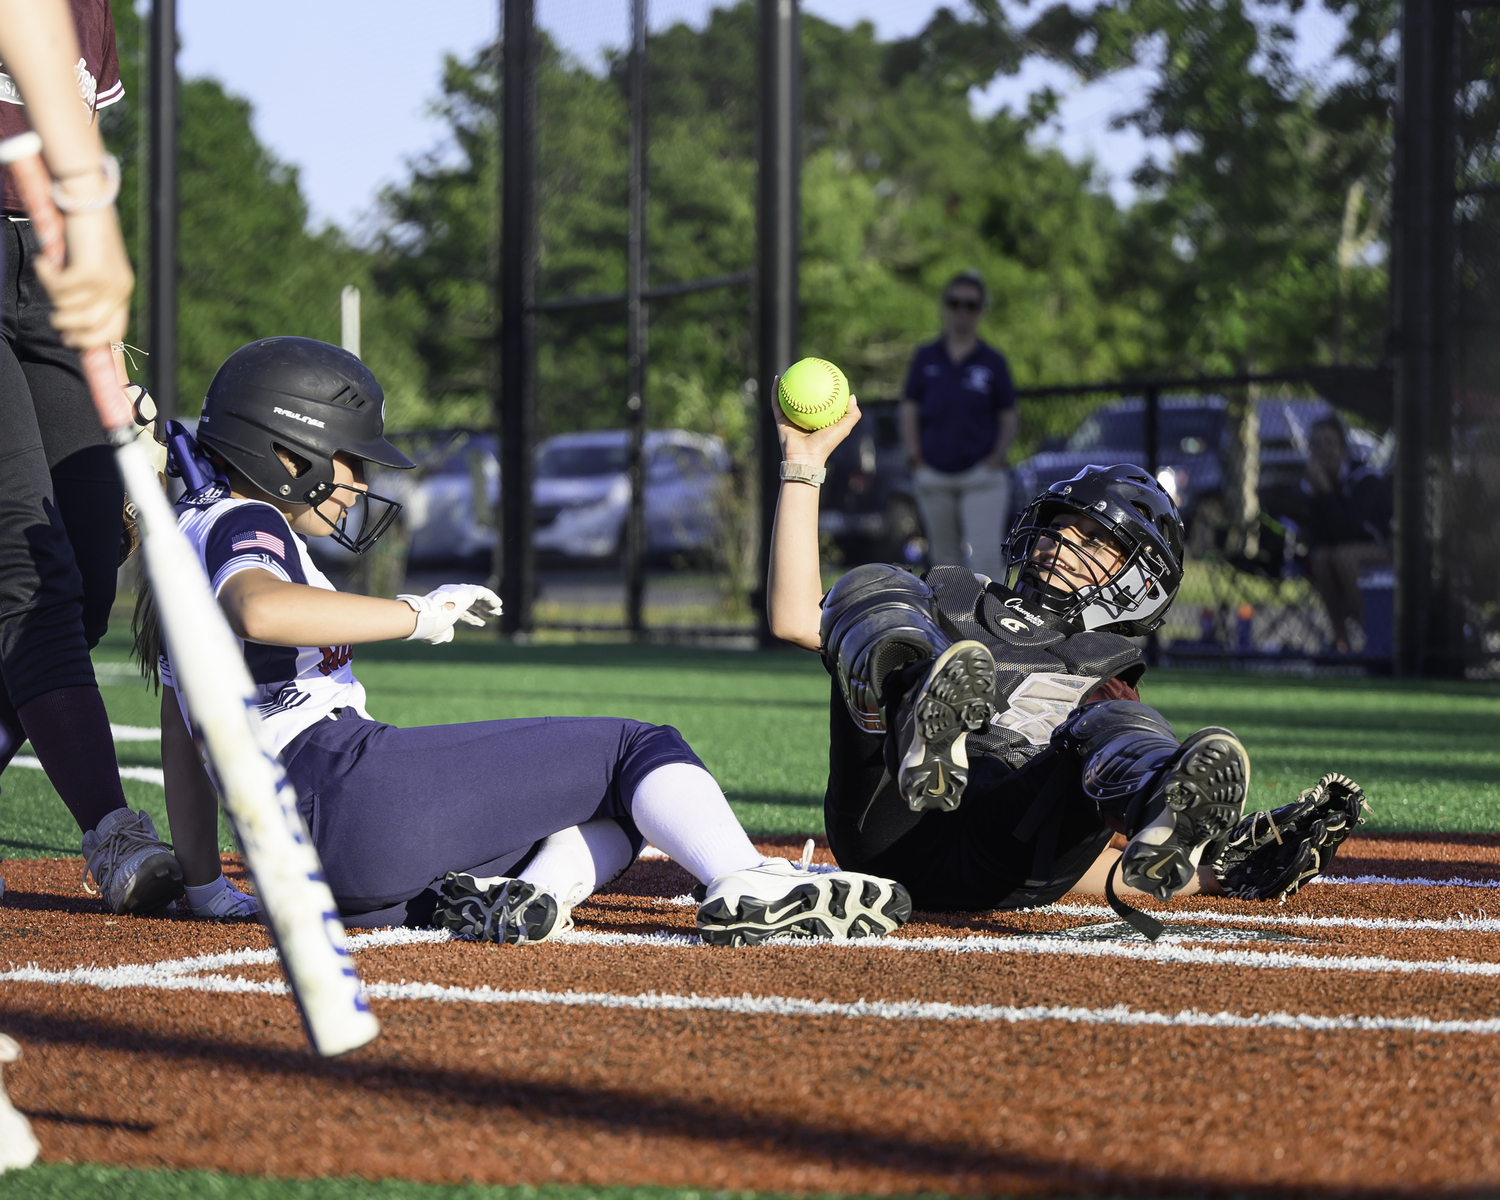 Sailor Cangiolosi shows the umpire the ball after a play at the plate. MARIANNE BARNETT